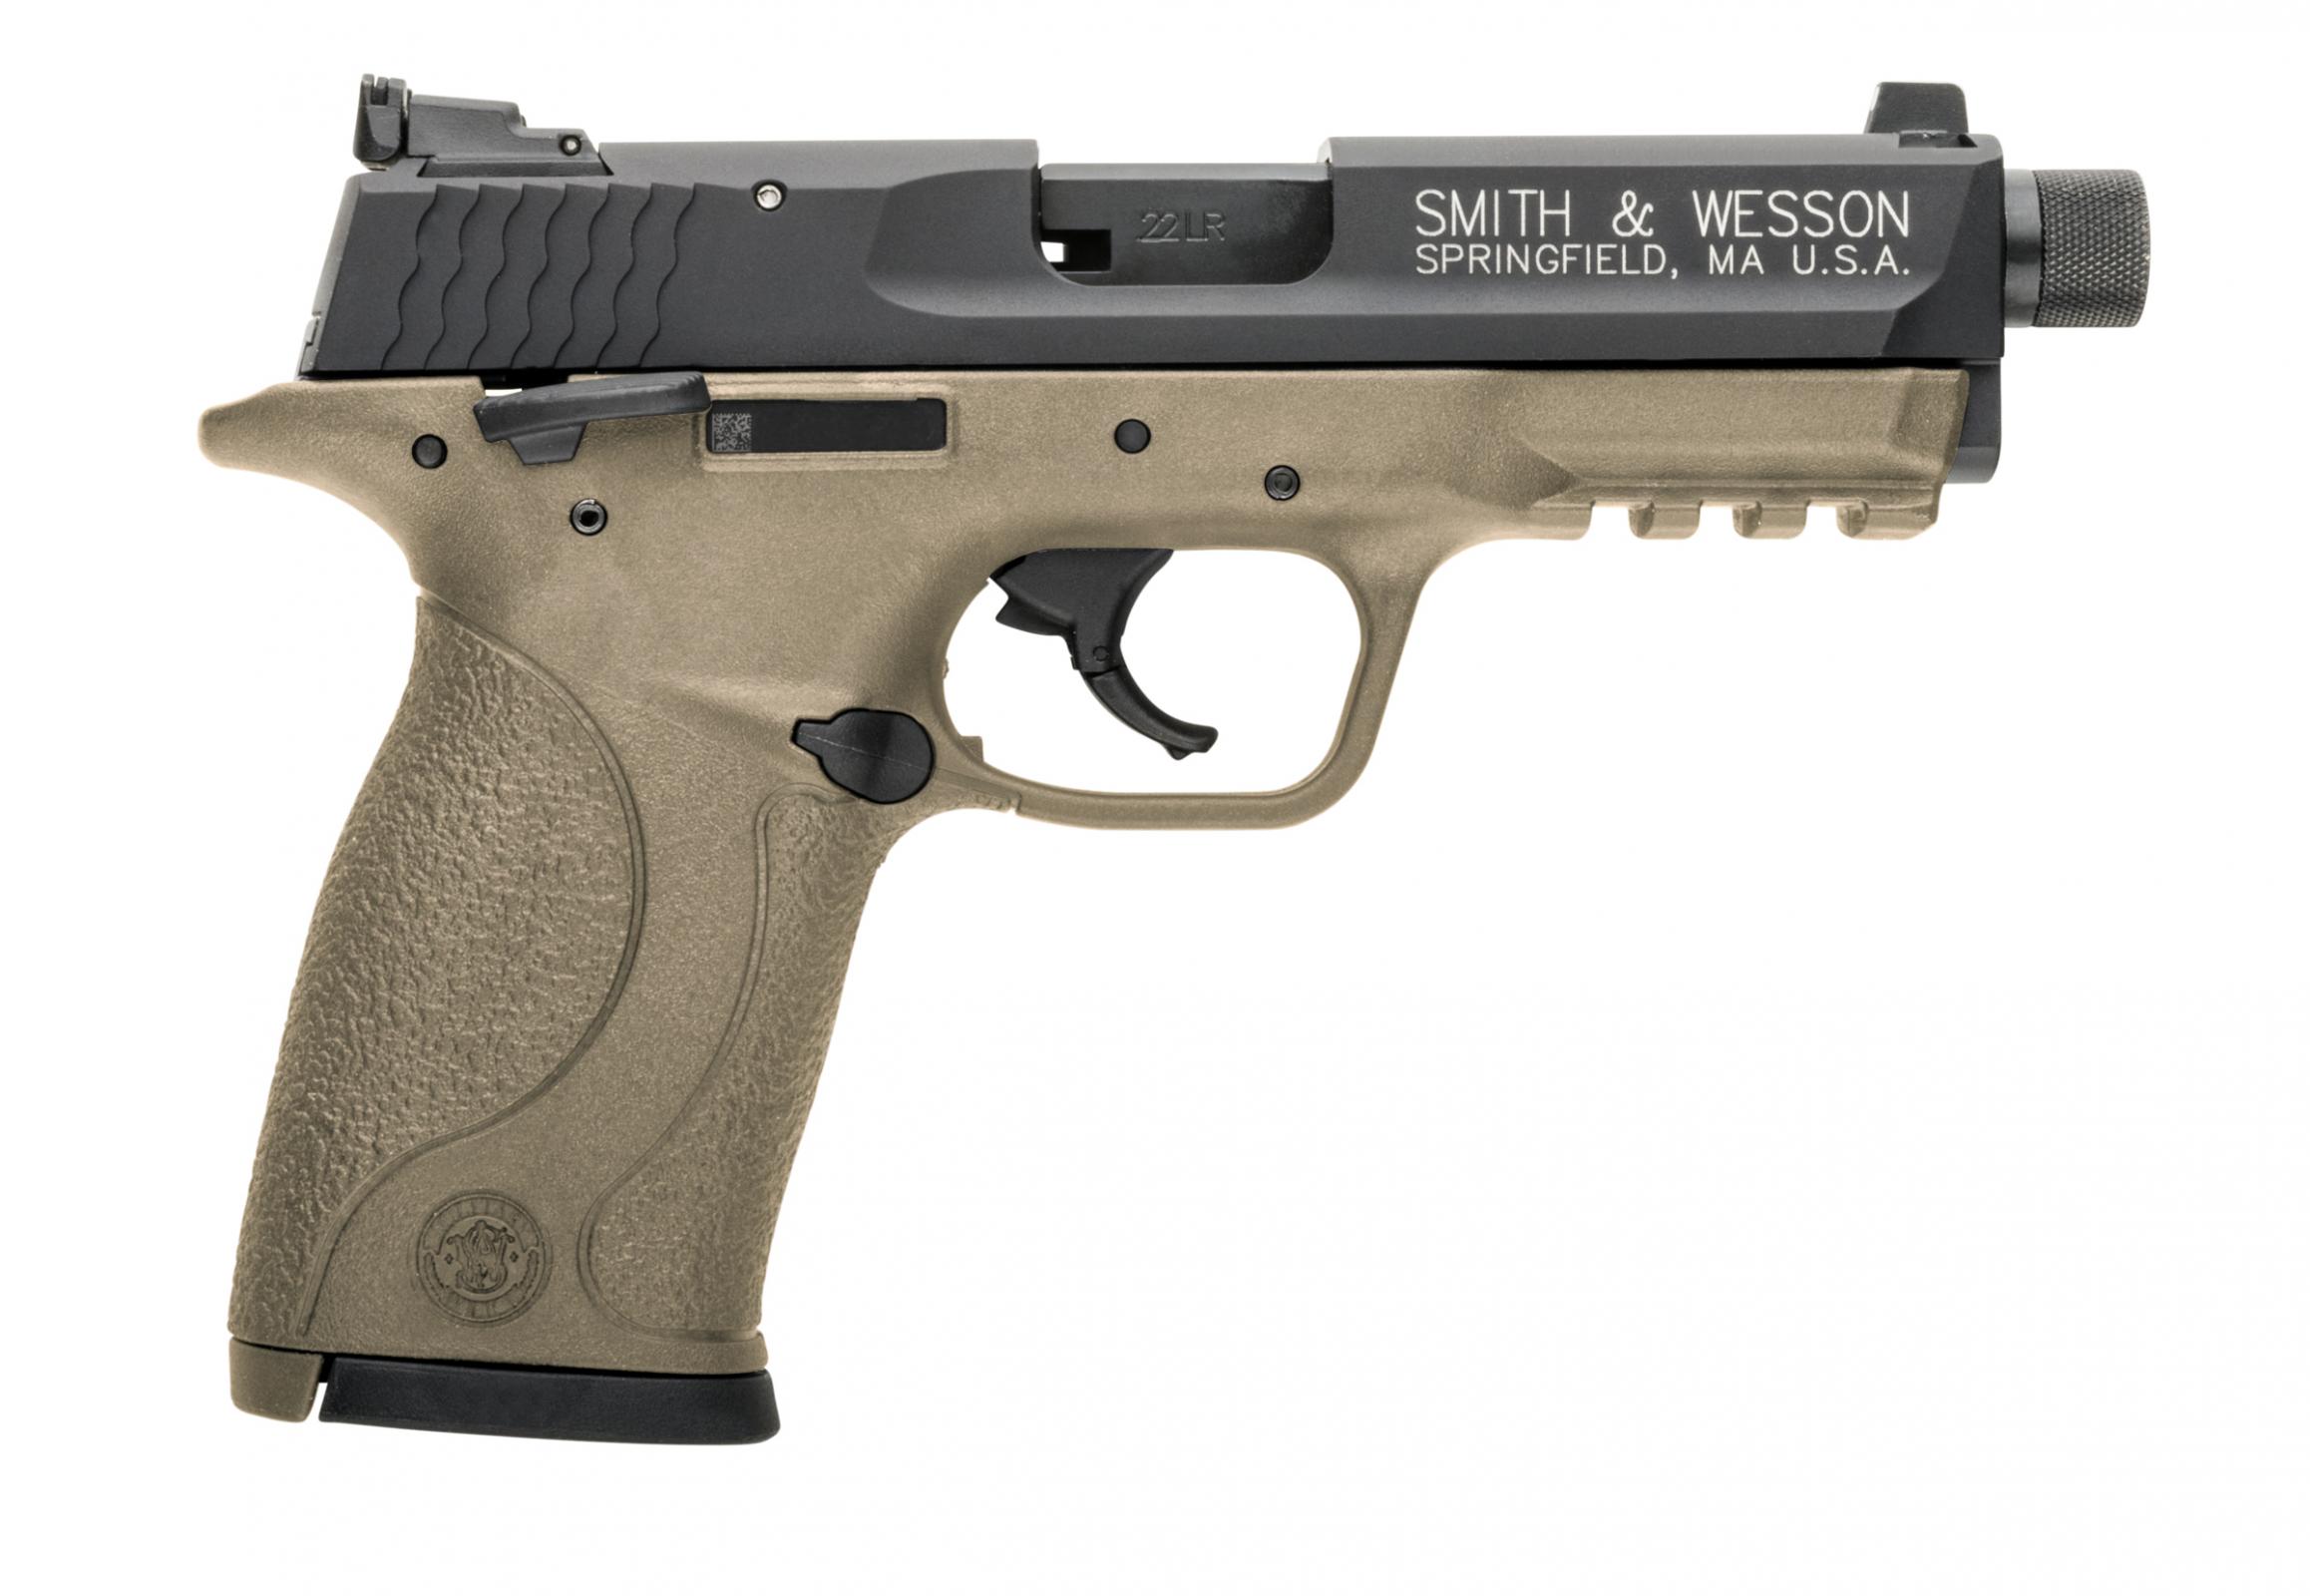 Smith & Wesson M&P22 Compact 22LR Pistol with Threaded Barrel Pisto...